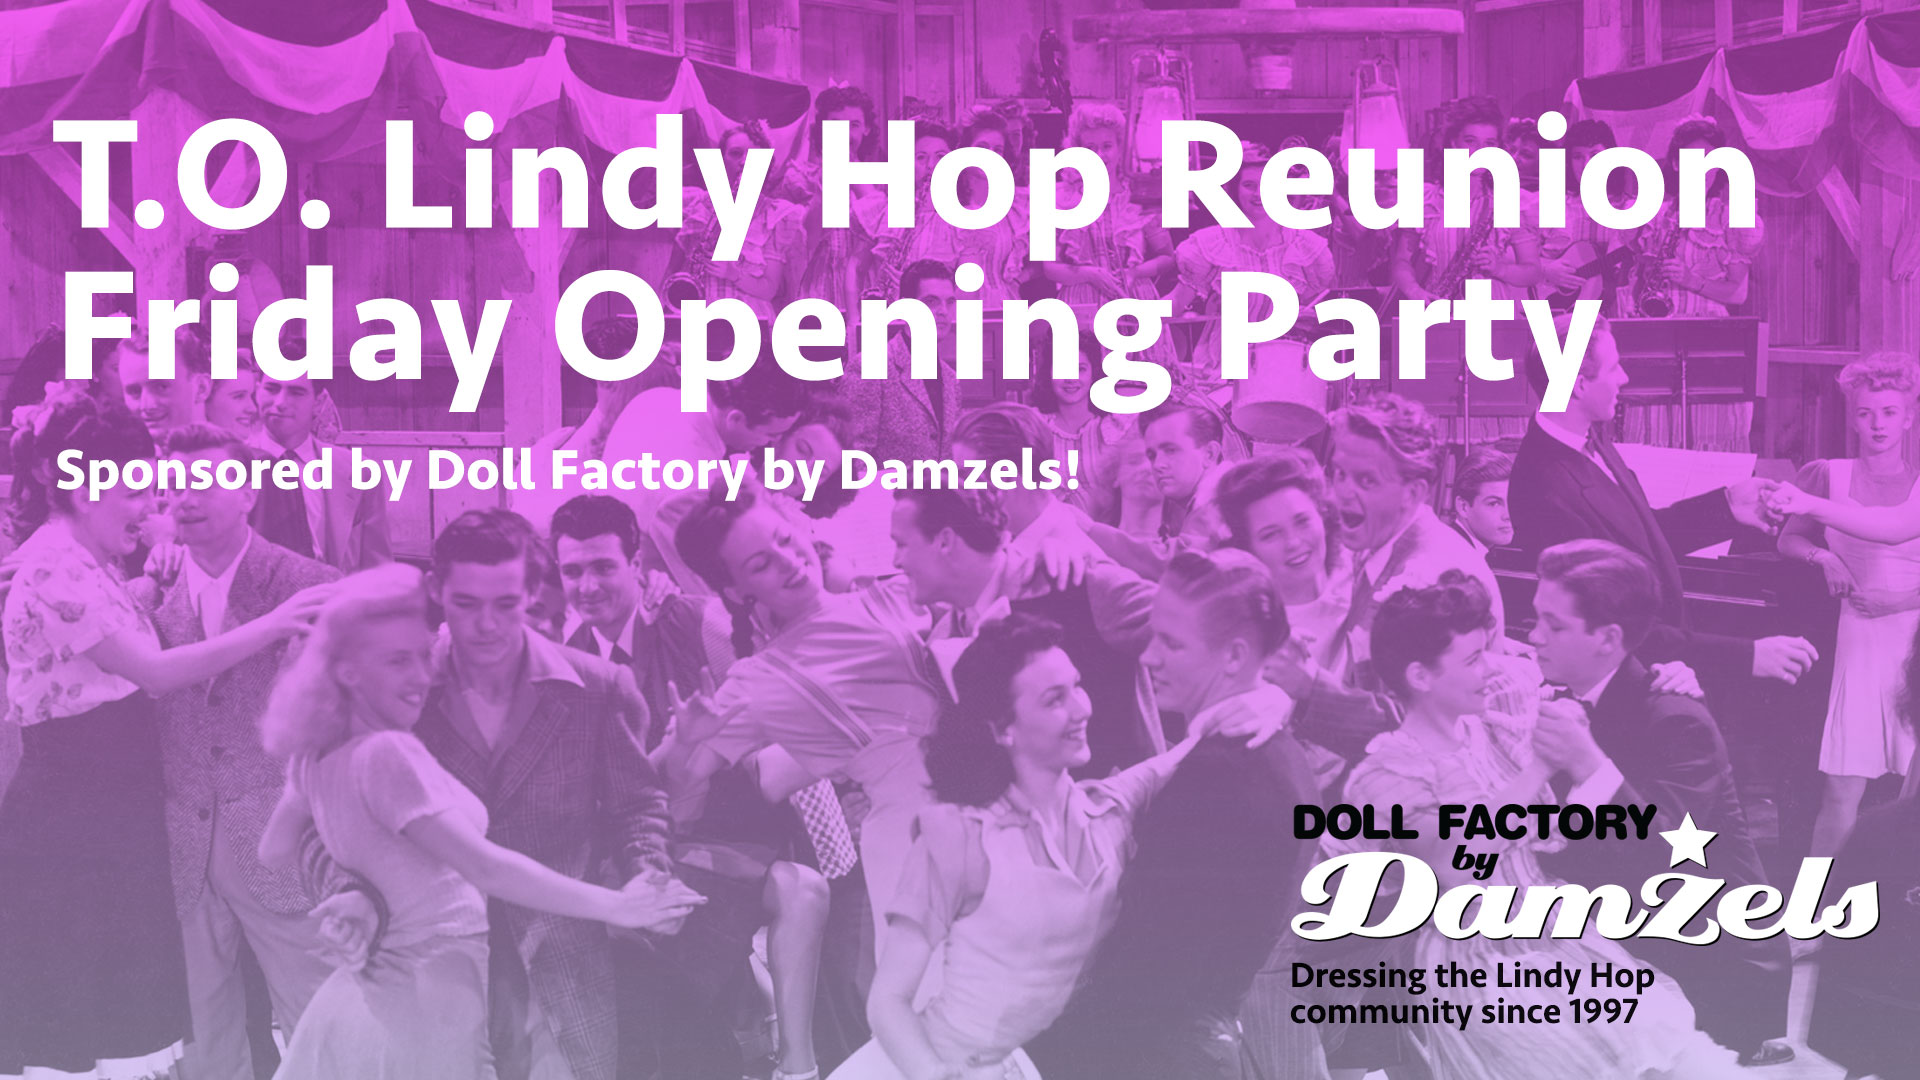 The Friday Opening Party is sponsored by Doll Factory by Damzels!